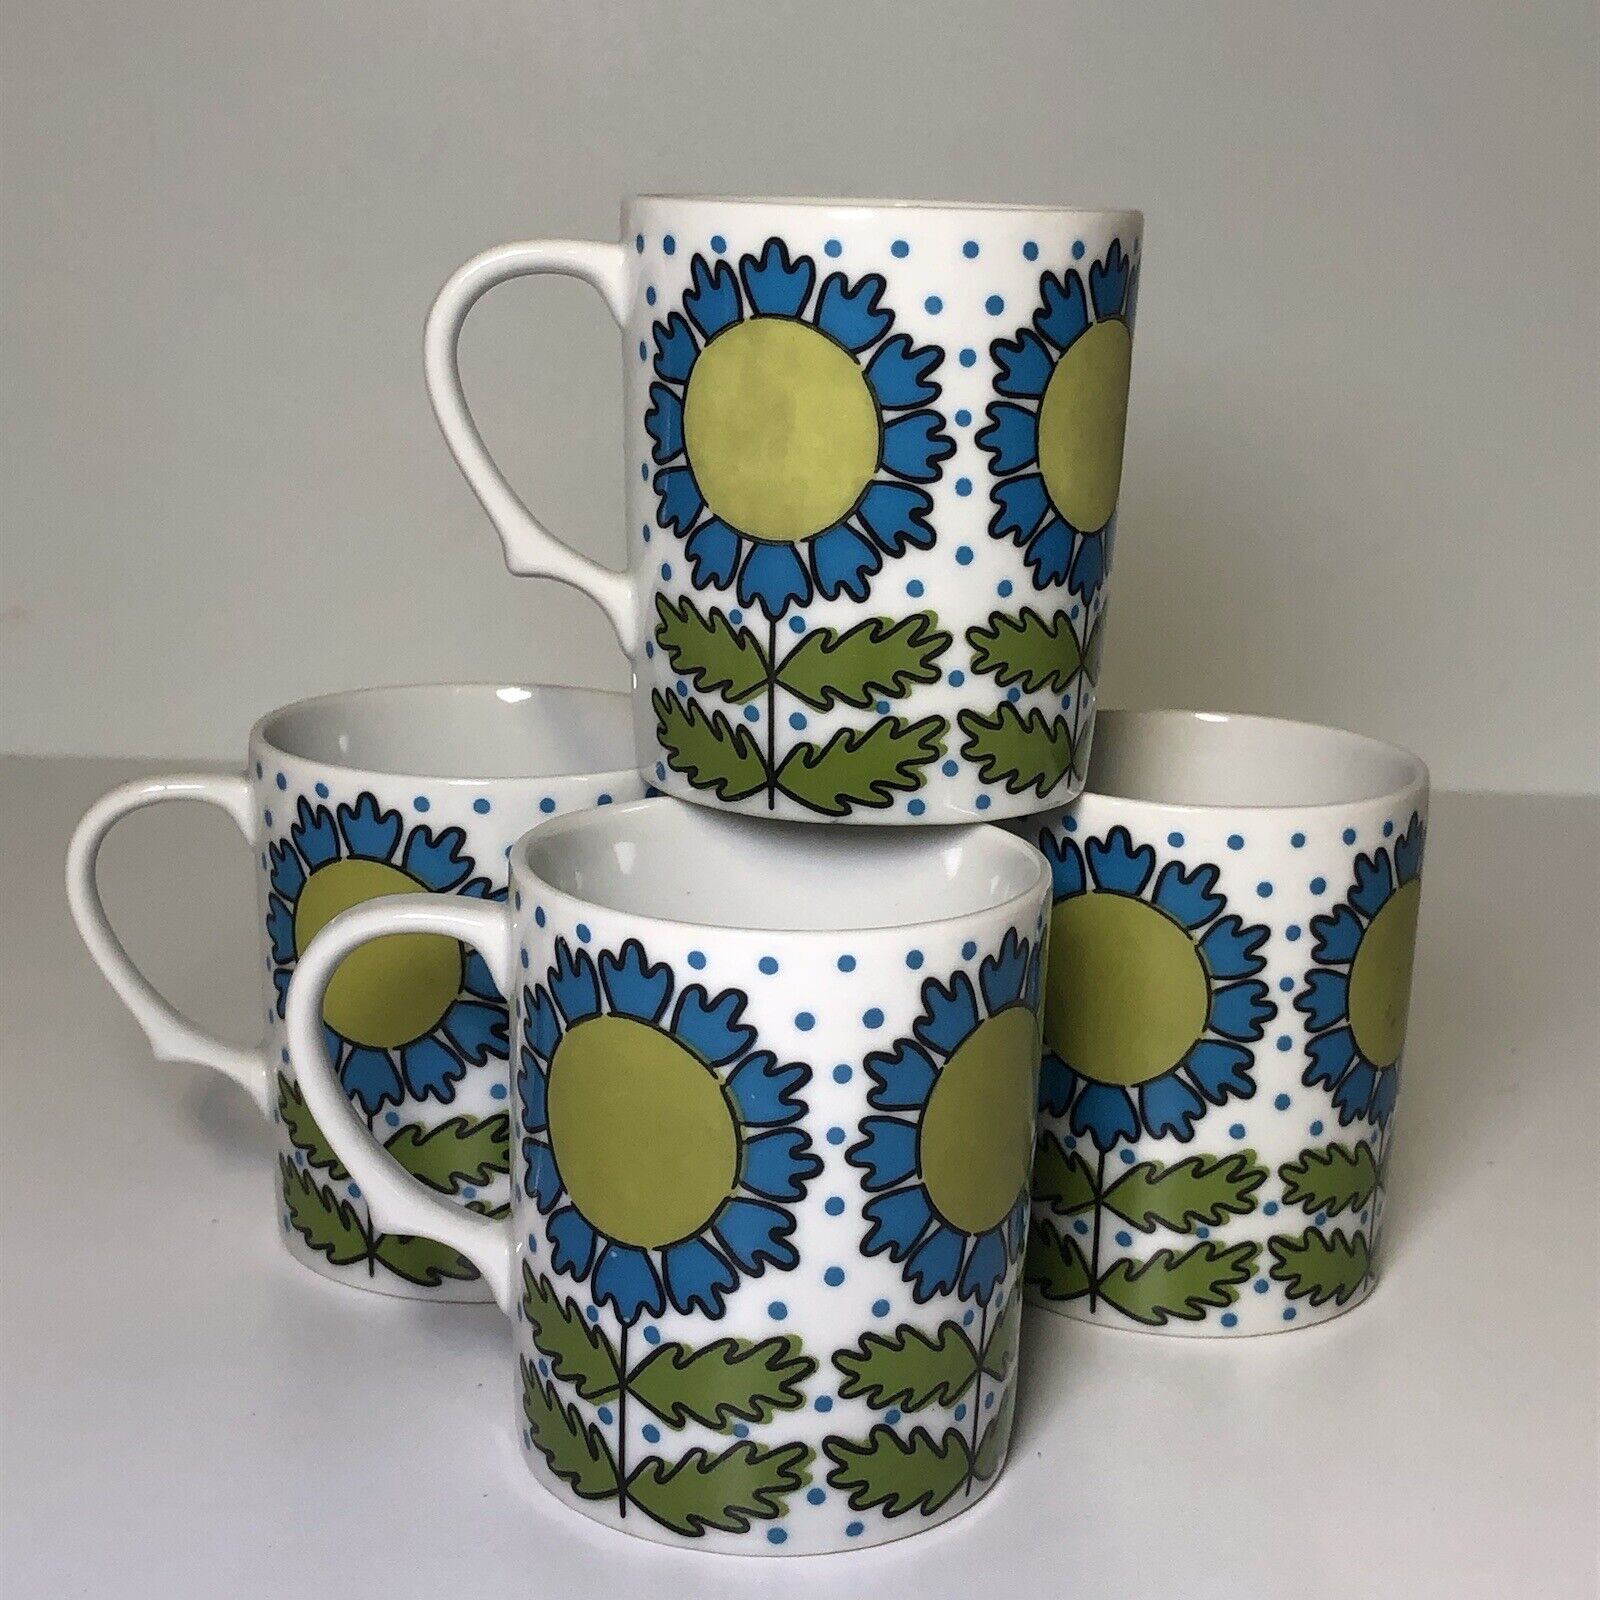 Vintage 70s Sunflower Coffee Mugs Blue & Green Retro Made In Japan Set Of 4 Cups